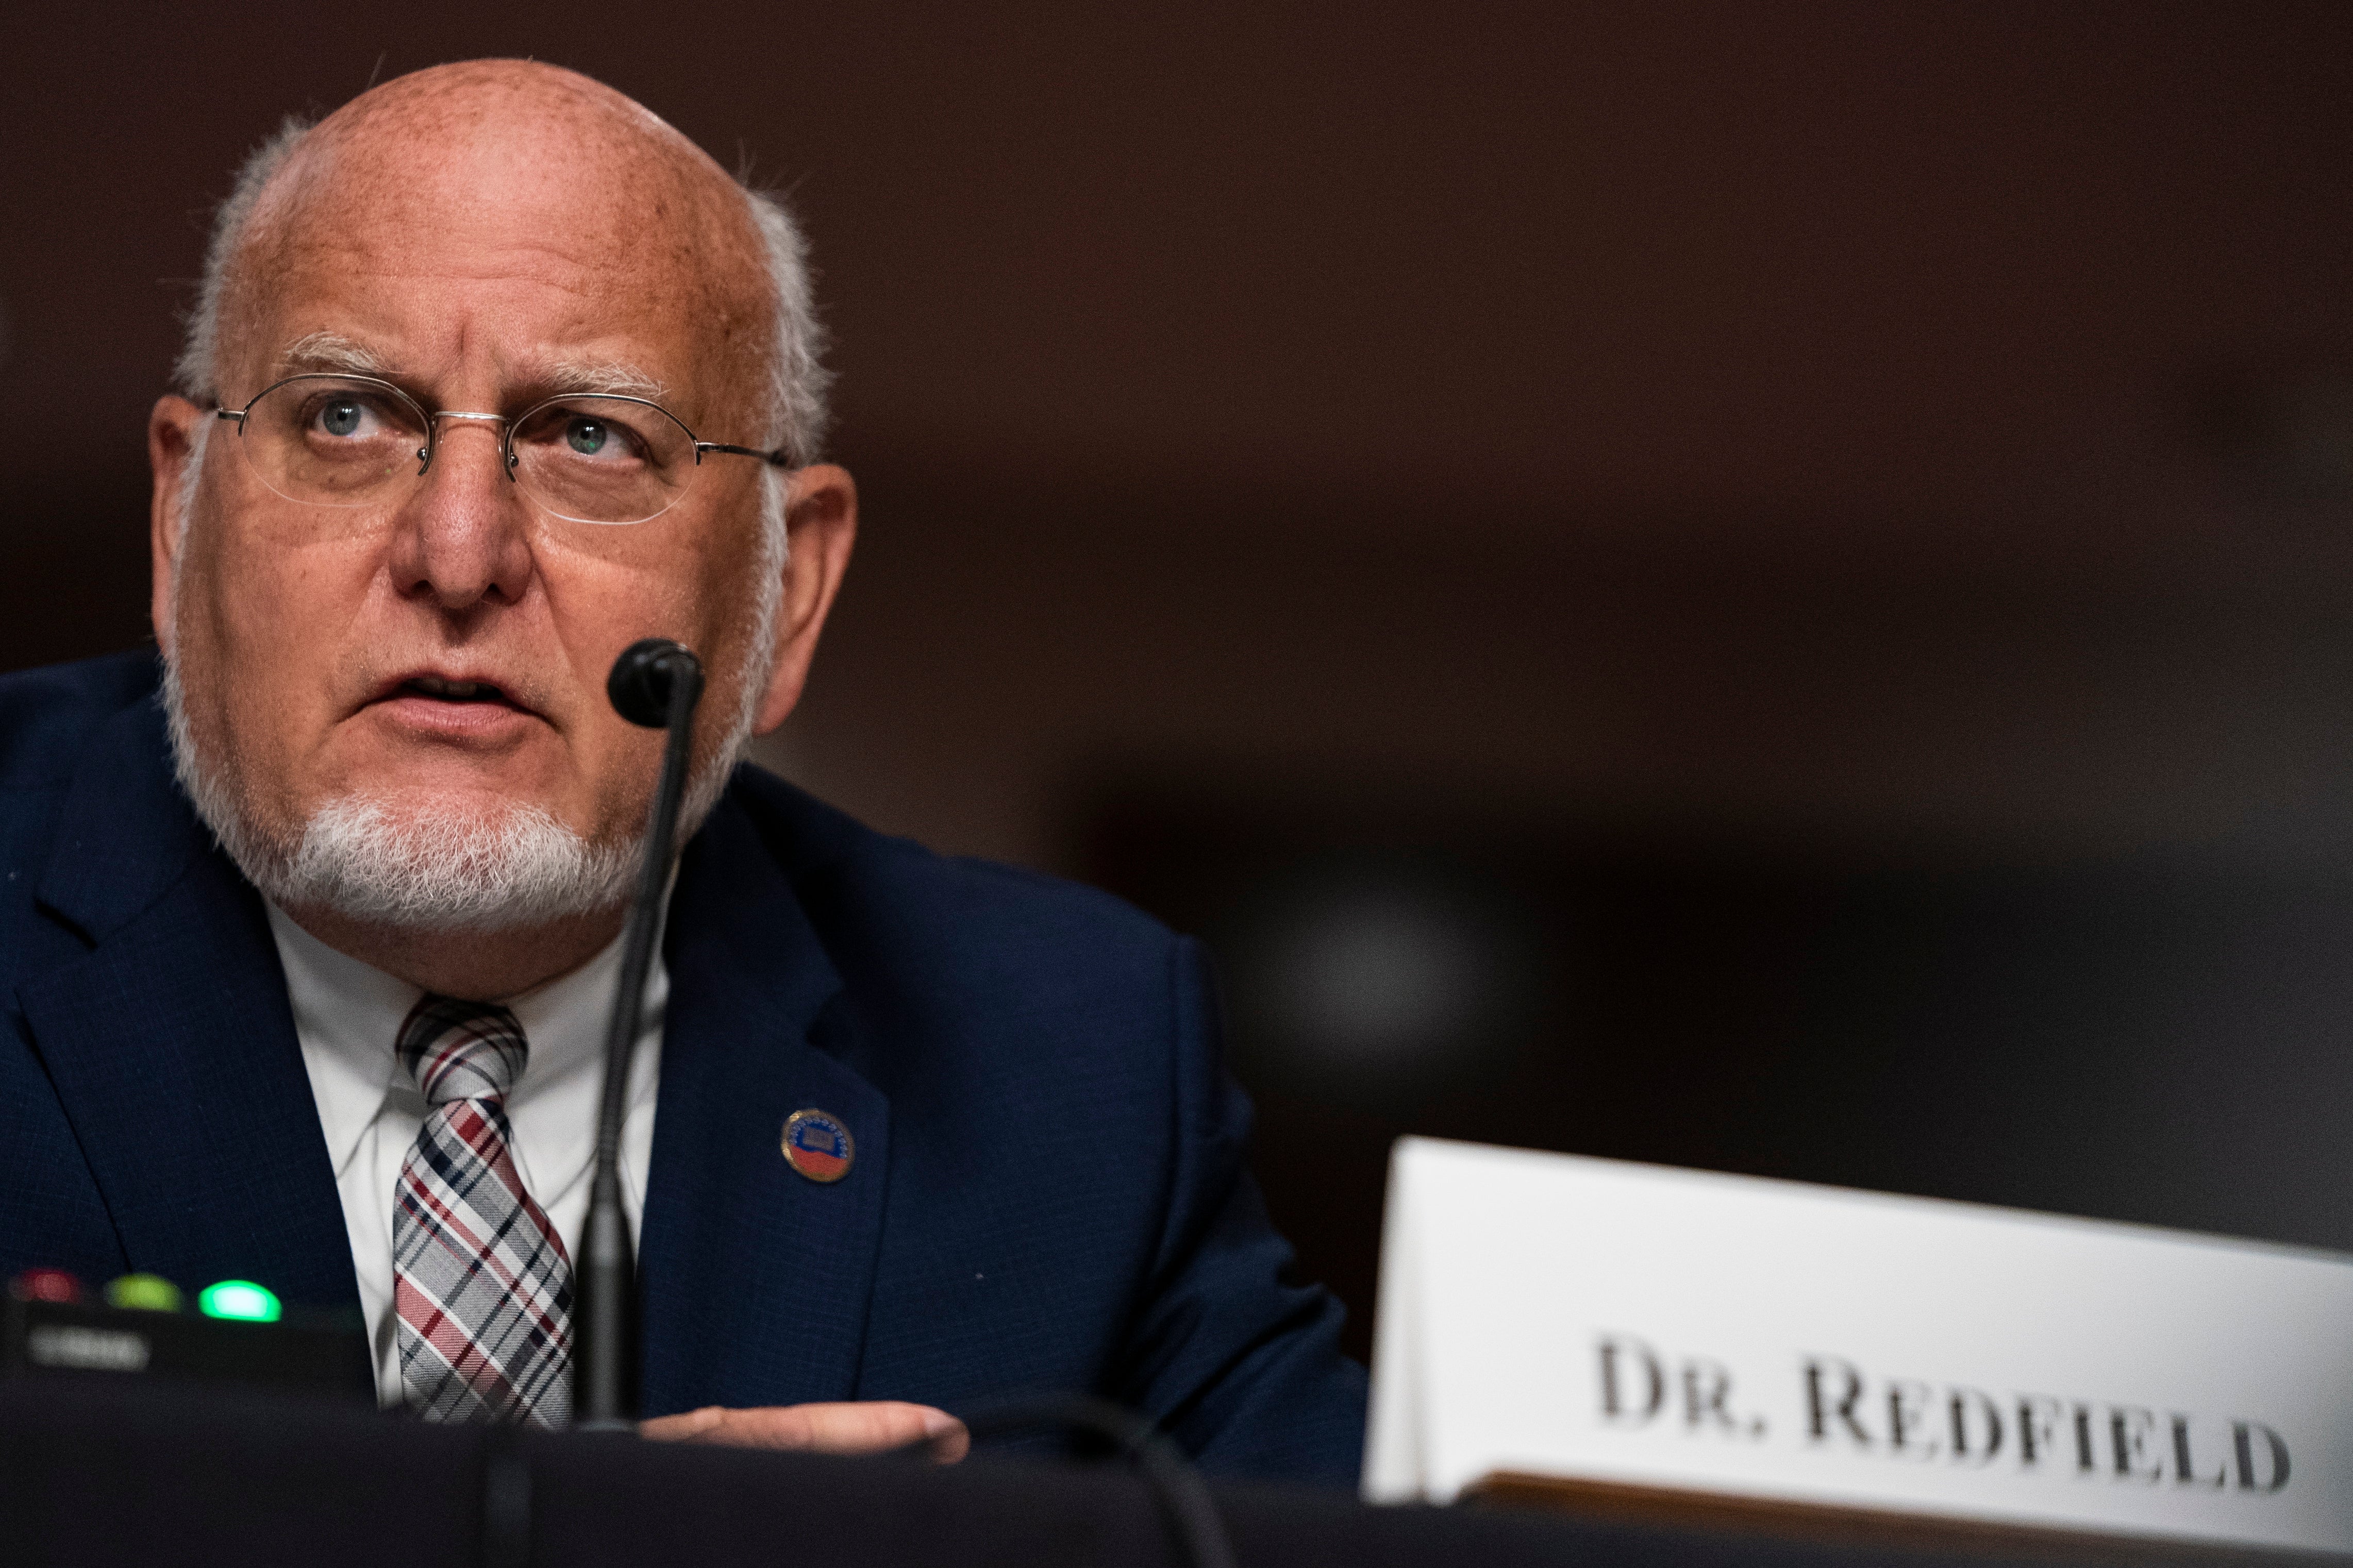 Former CDC director Robert Redfield says he received death threats over his support for the Wuhan ‘lab leak’ theory of Covid’s origin